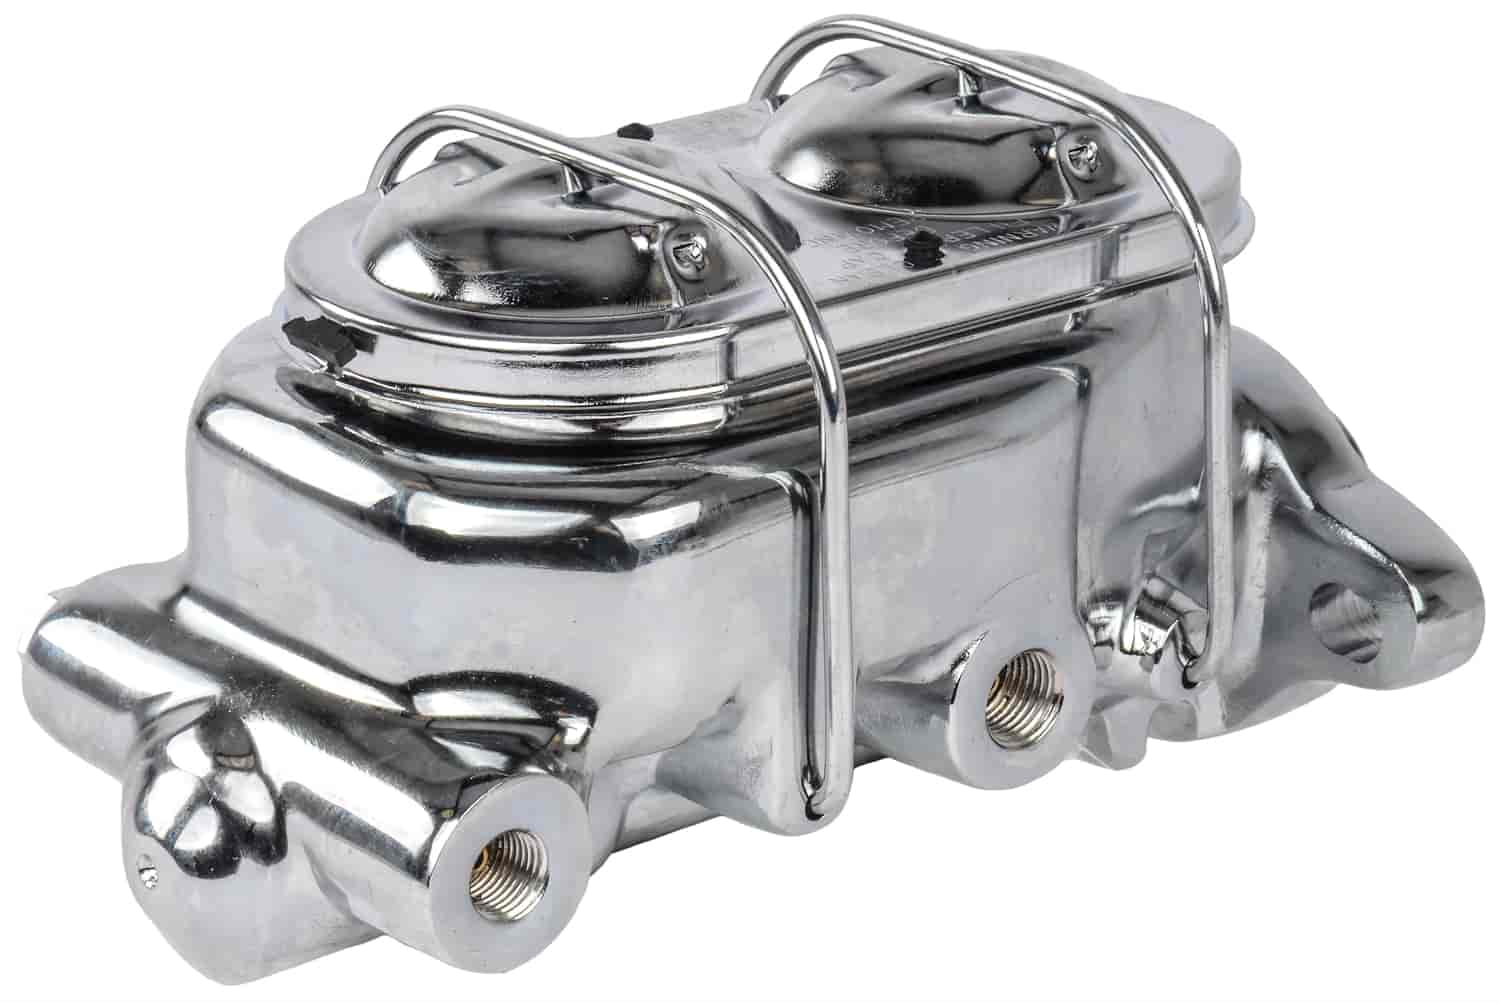 Brake Master Cylinder with Dual Reservoir, Aluminum with Chrome Finish [Corvette Style]